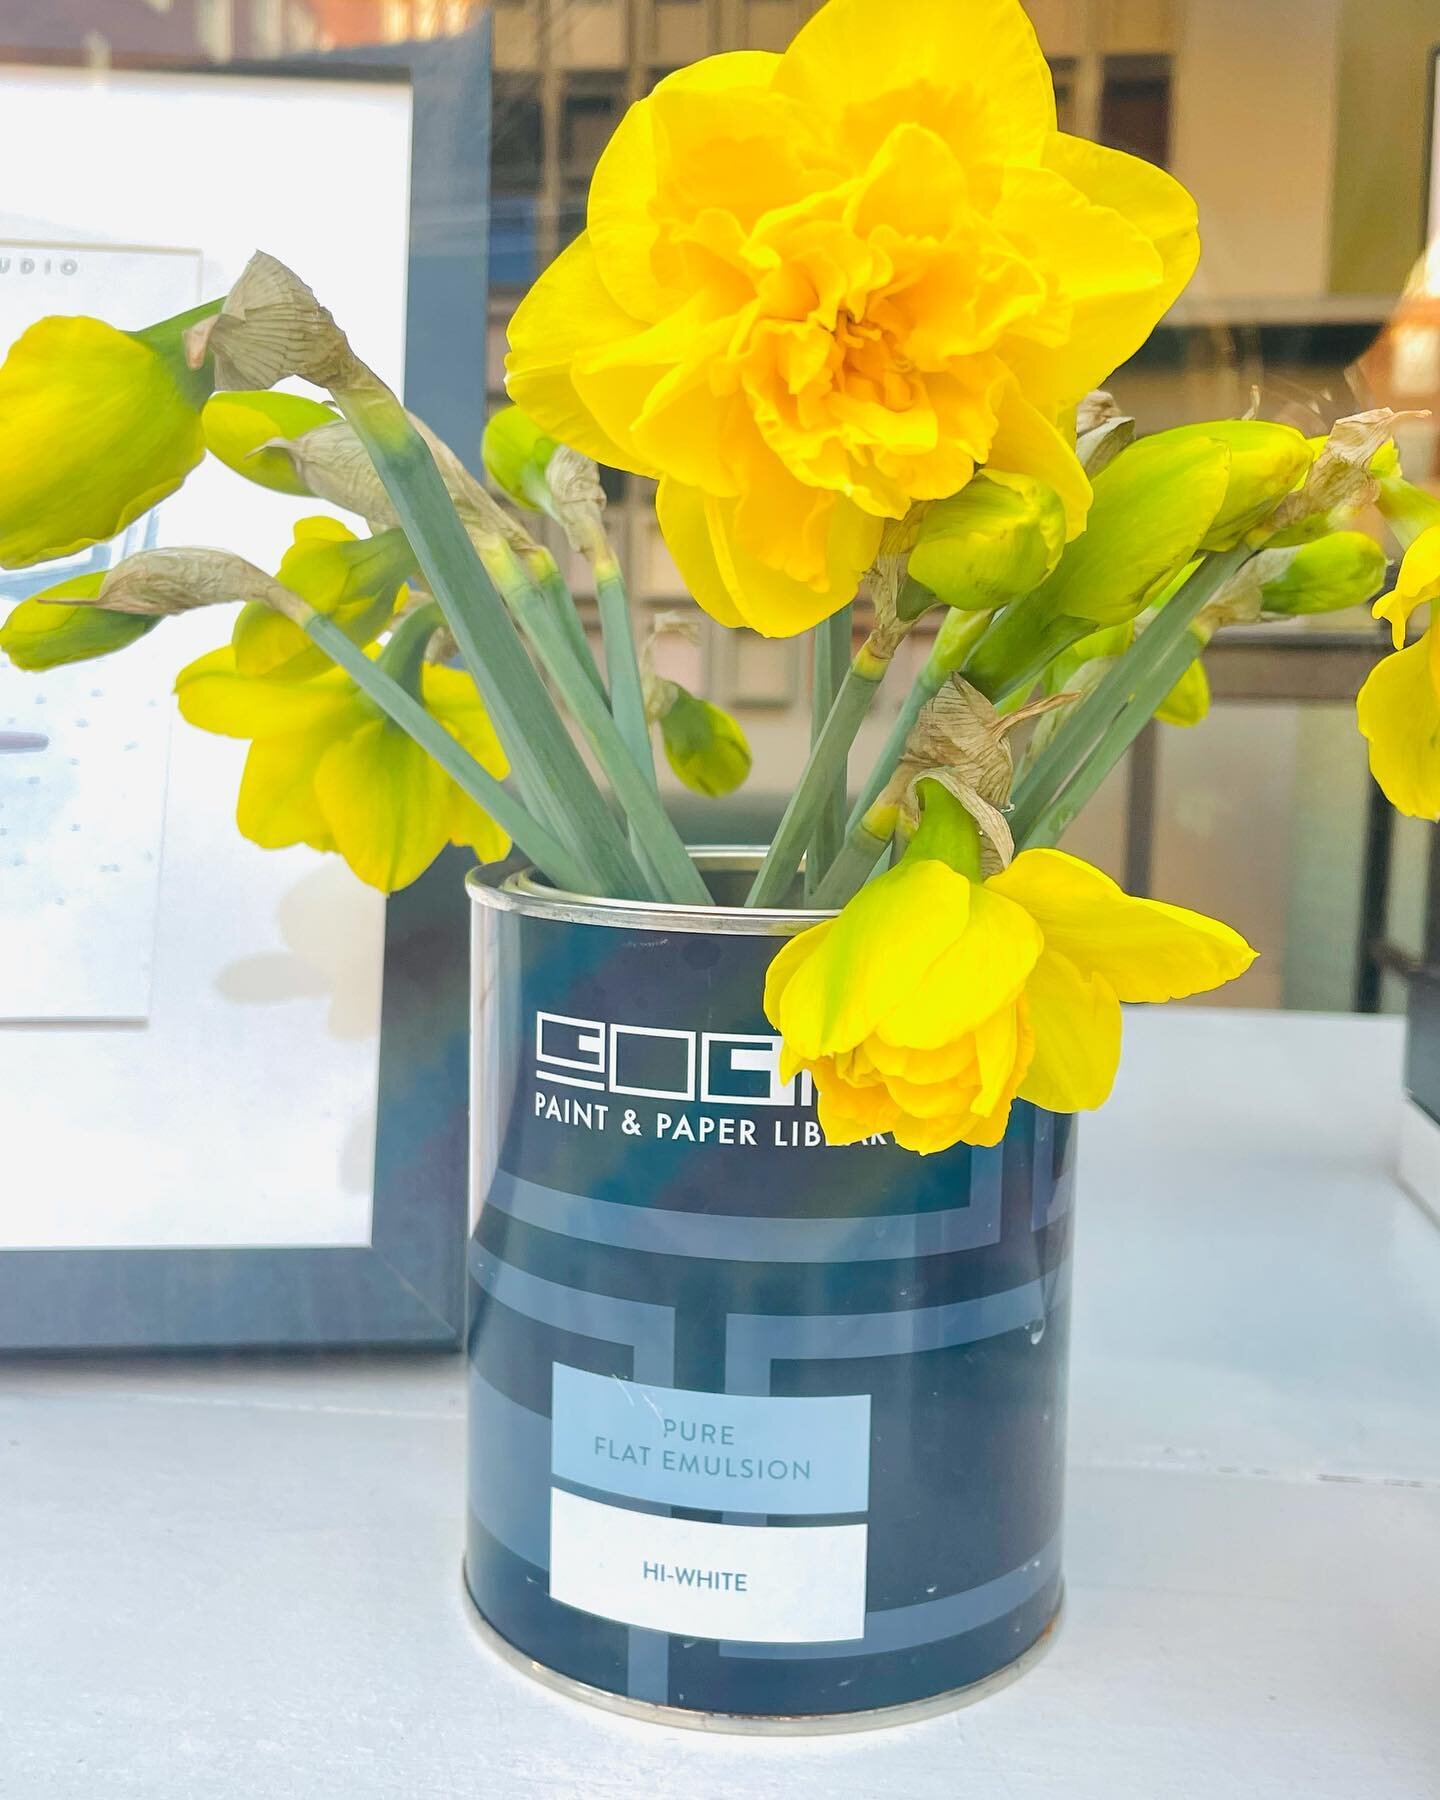 💛 Daffodils and sunshine mean one thing&hellip; Spring is in the air! Time to start thinking about Spring cleaning, dusting away winter and looking ahead to brighter more colour filled days. Perhaps you&rsquo;re thinking of re-decorating this Spring